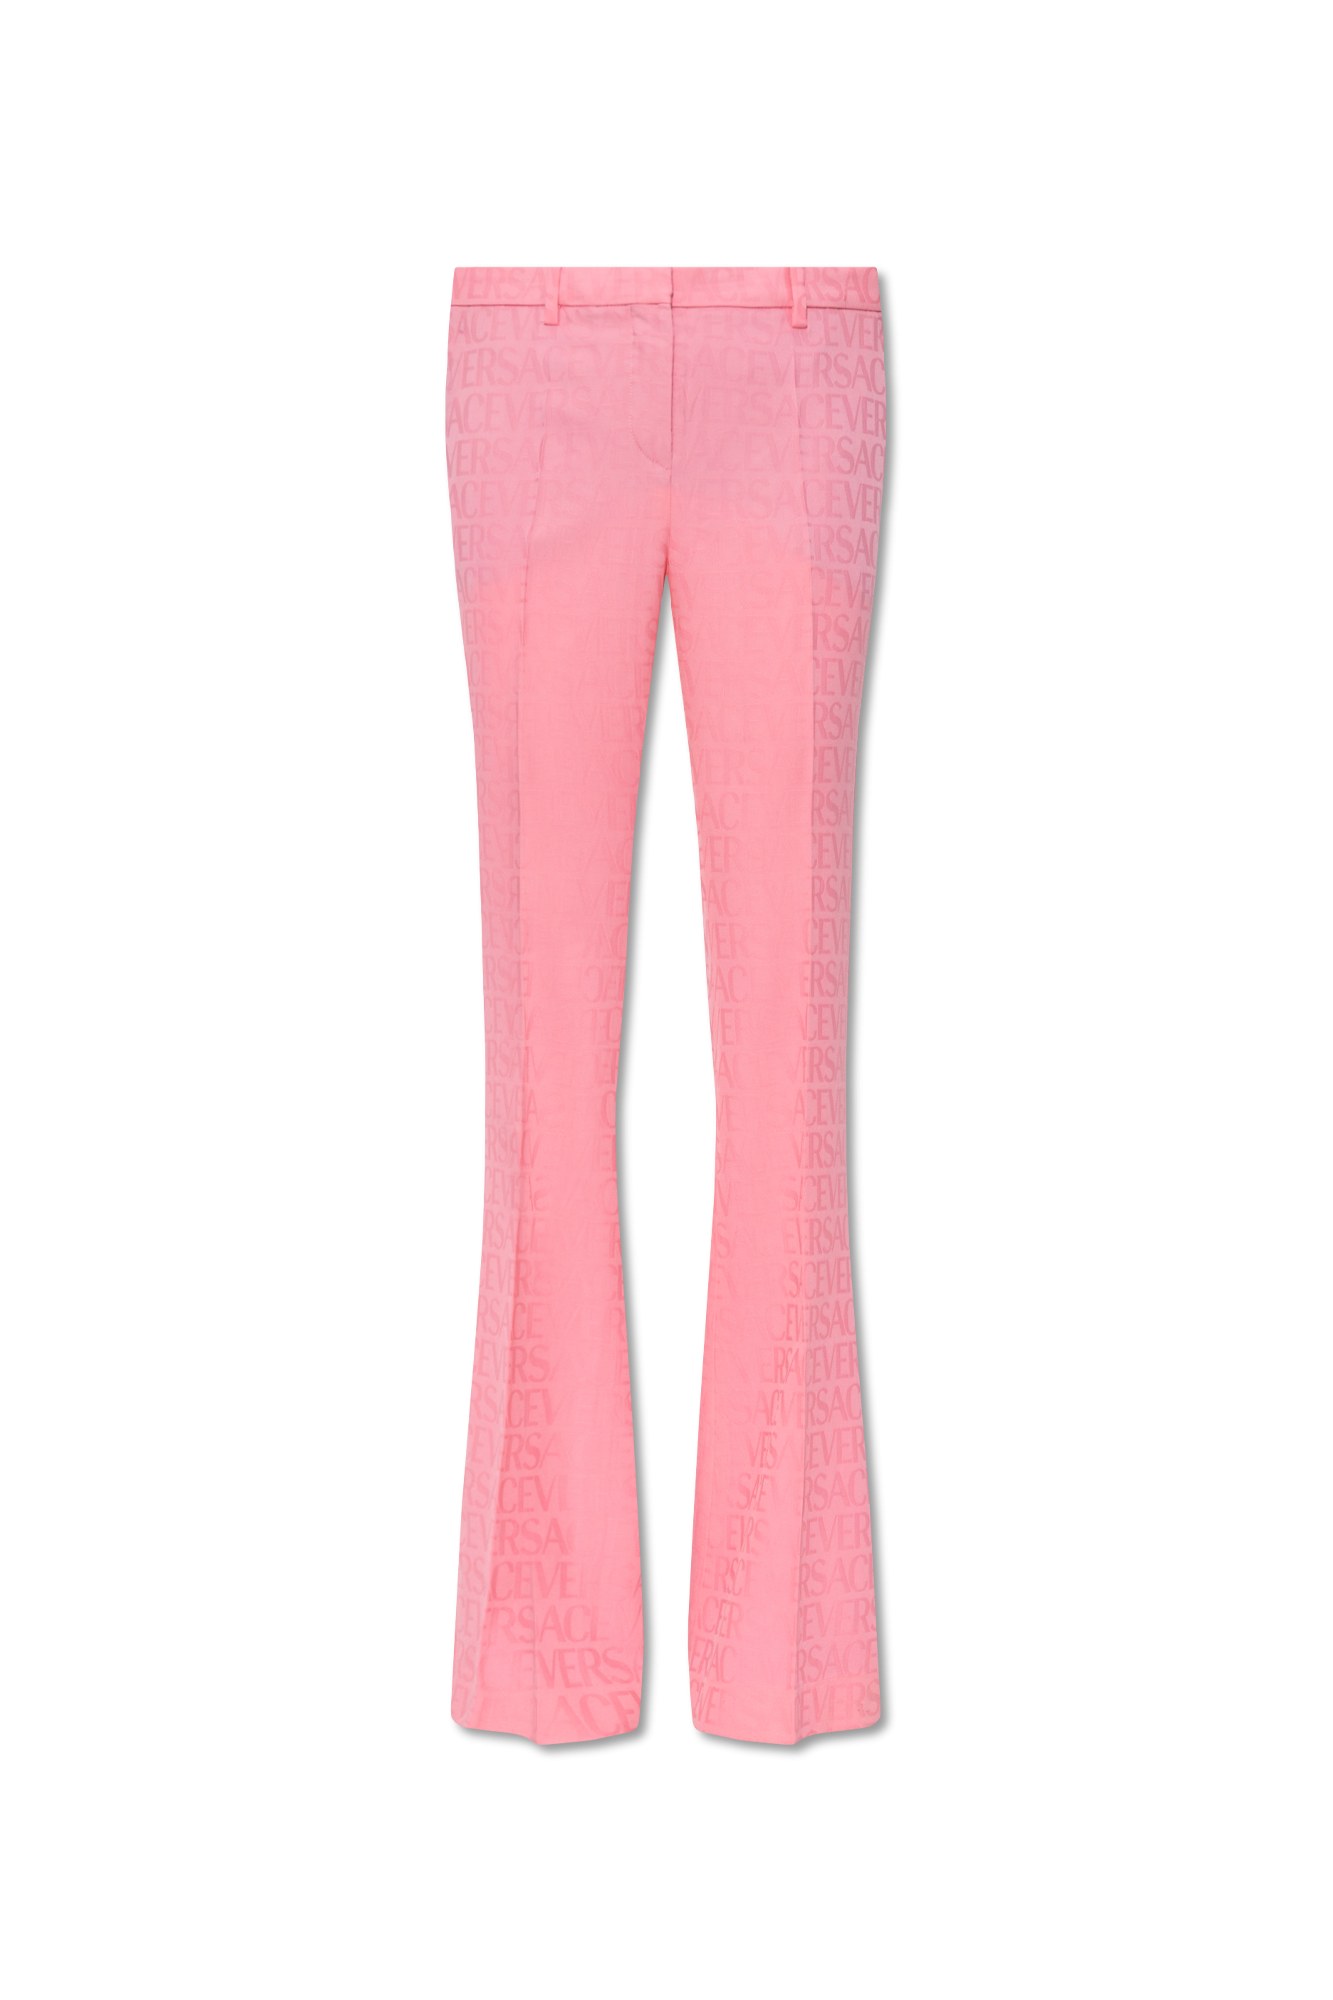 Versace Pleat-front Marant trousers from ‘La Vacanza’ collection